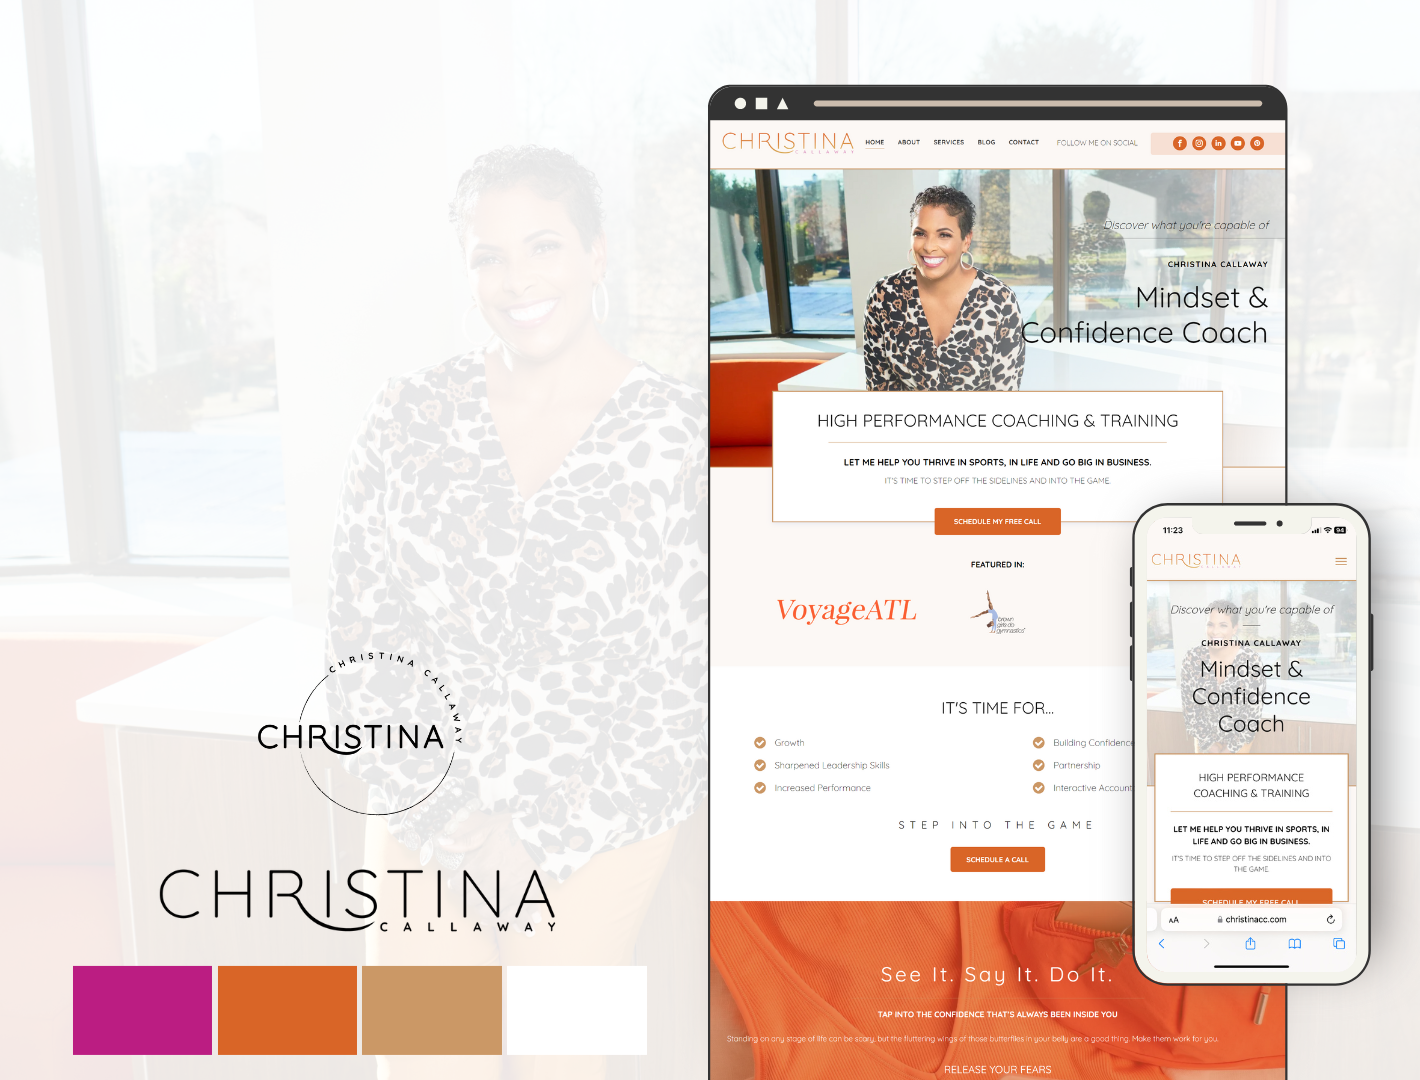 A visually appealing personal coaching website designed by Shayla Bre, featuring bold colors and intuitive navigation.